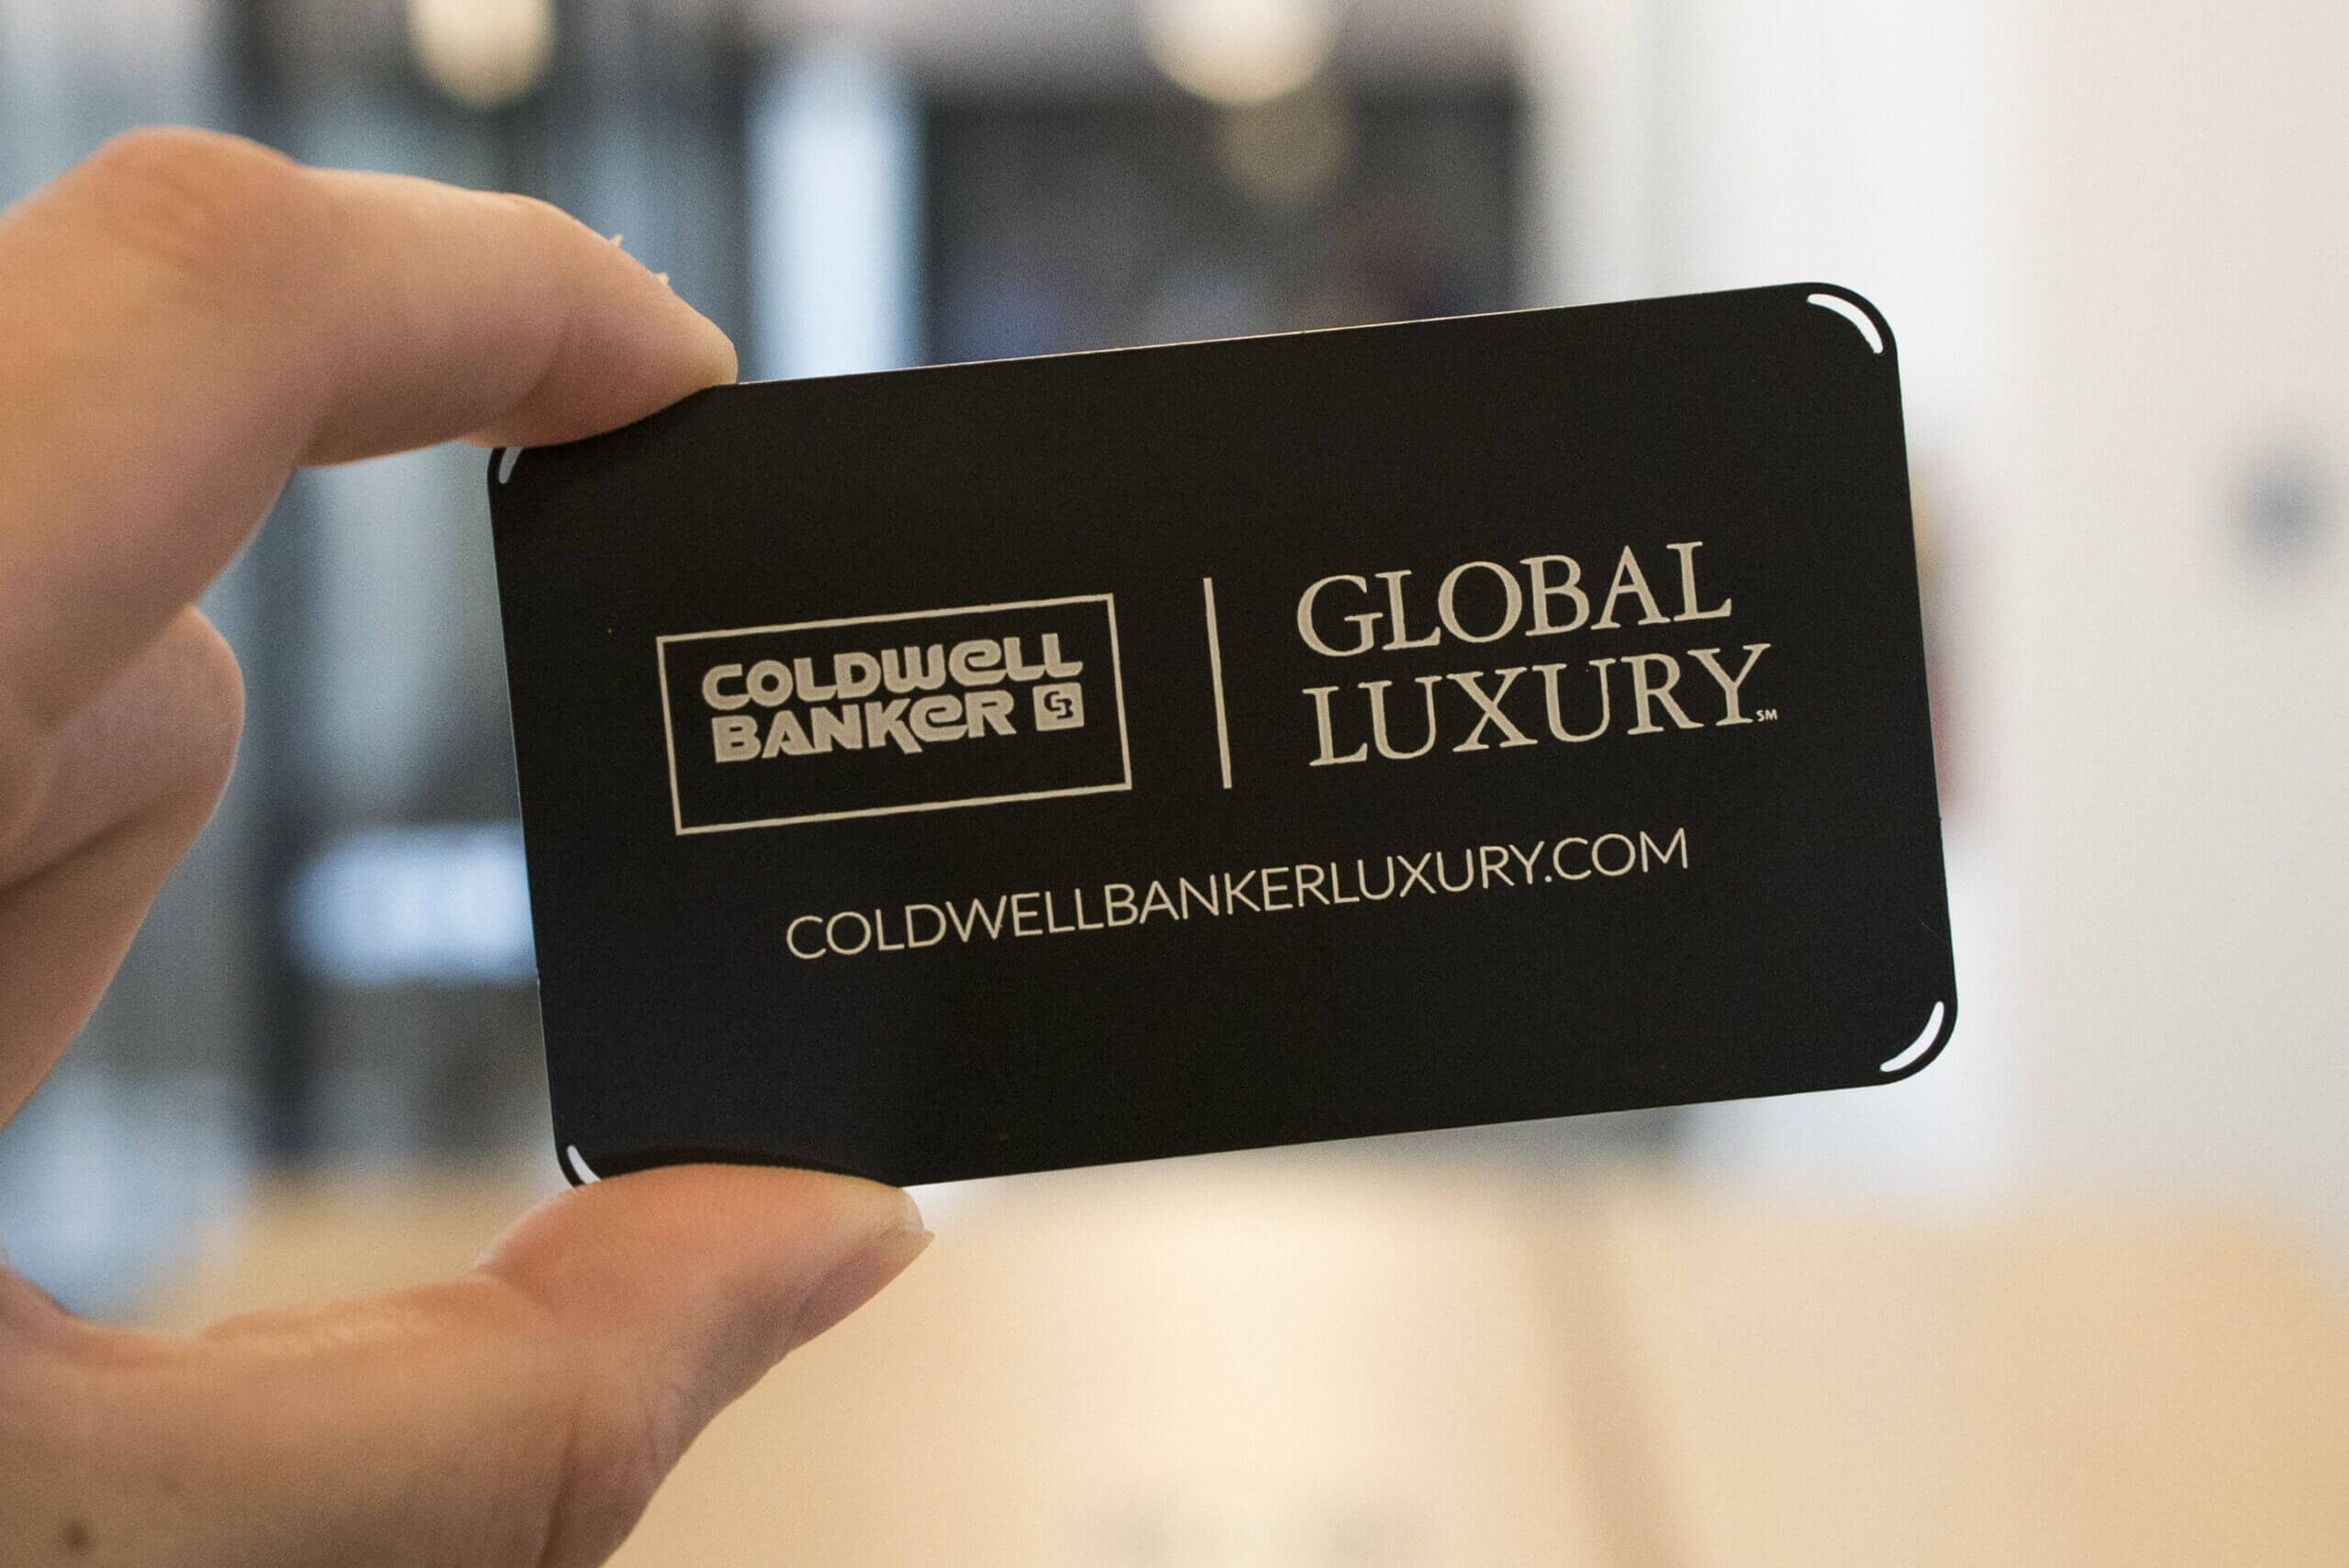 Custom Metal Business Card For A Luxury Real Estate Agent In Coldwell Banker Business Card Template